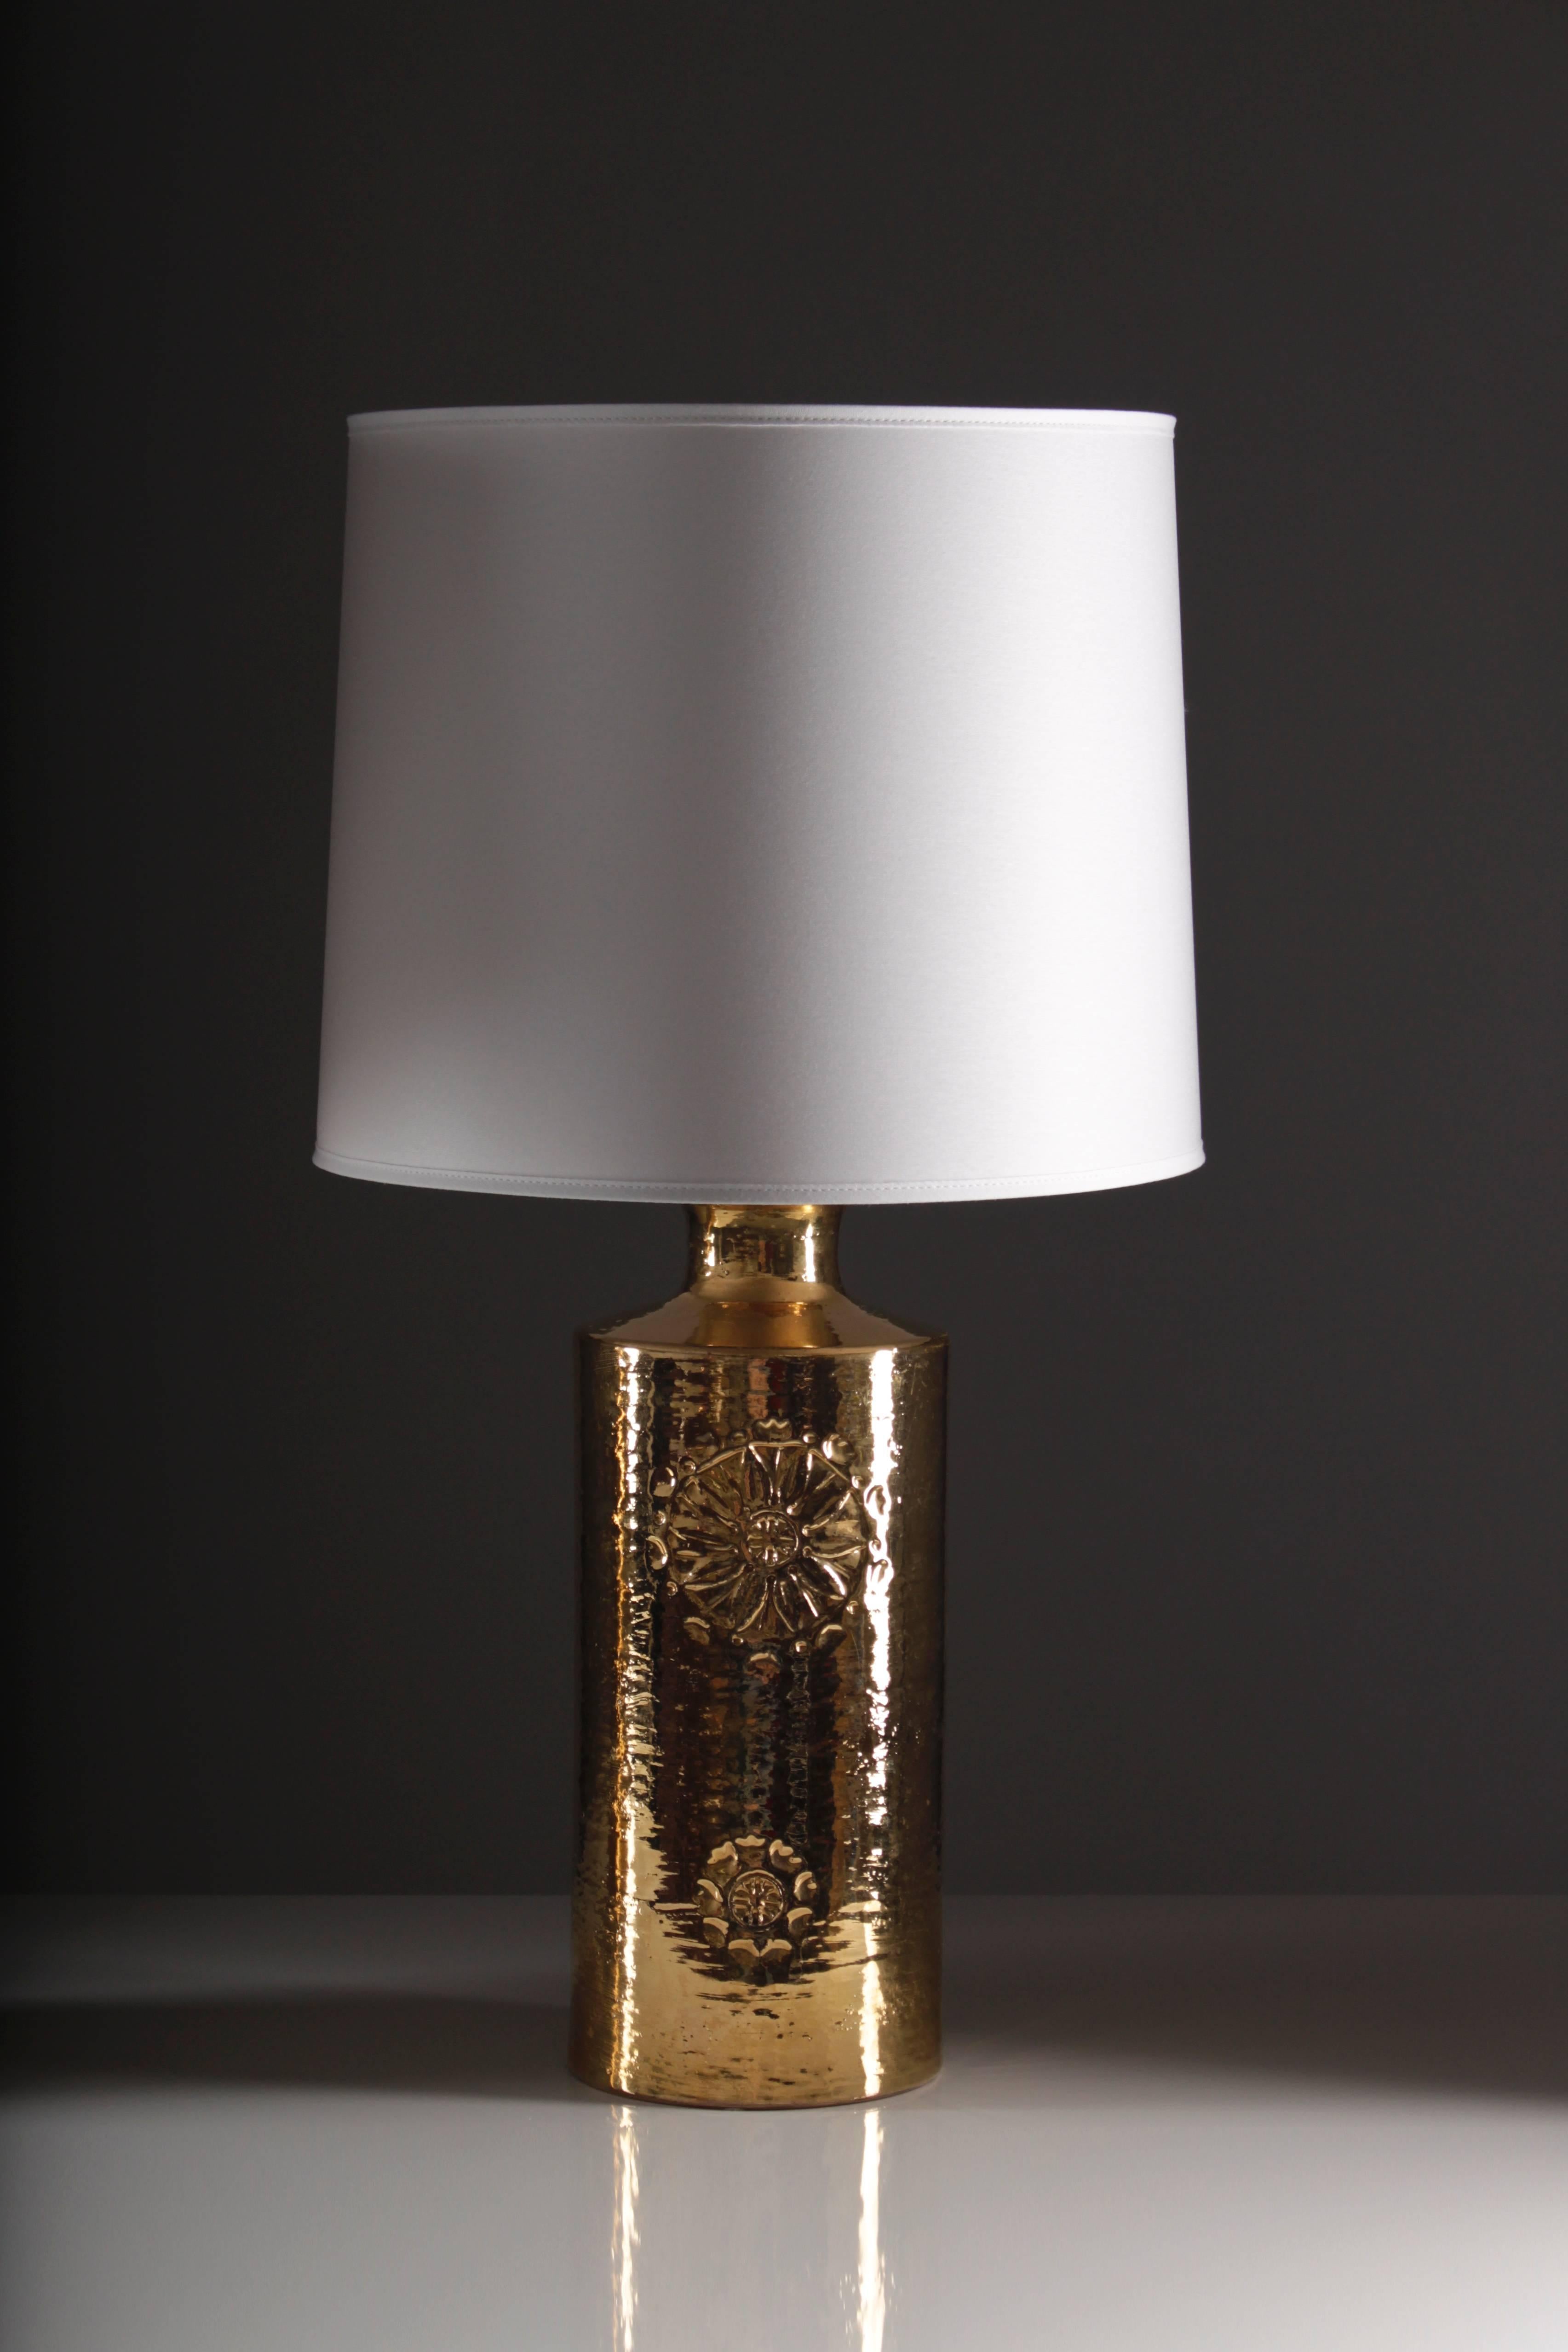 Pair of table lamps by Bitossi for Bergboms in 22-karat gold glazed ceramic with floral details, in excellent condition.
Please note that the lamps are sold without shades.
The height without the shades is 45cm, with shades 63cm.